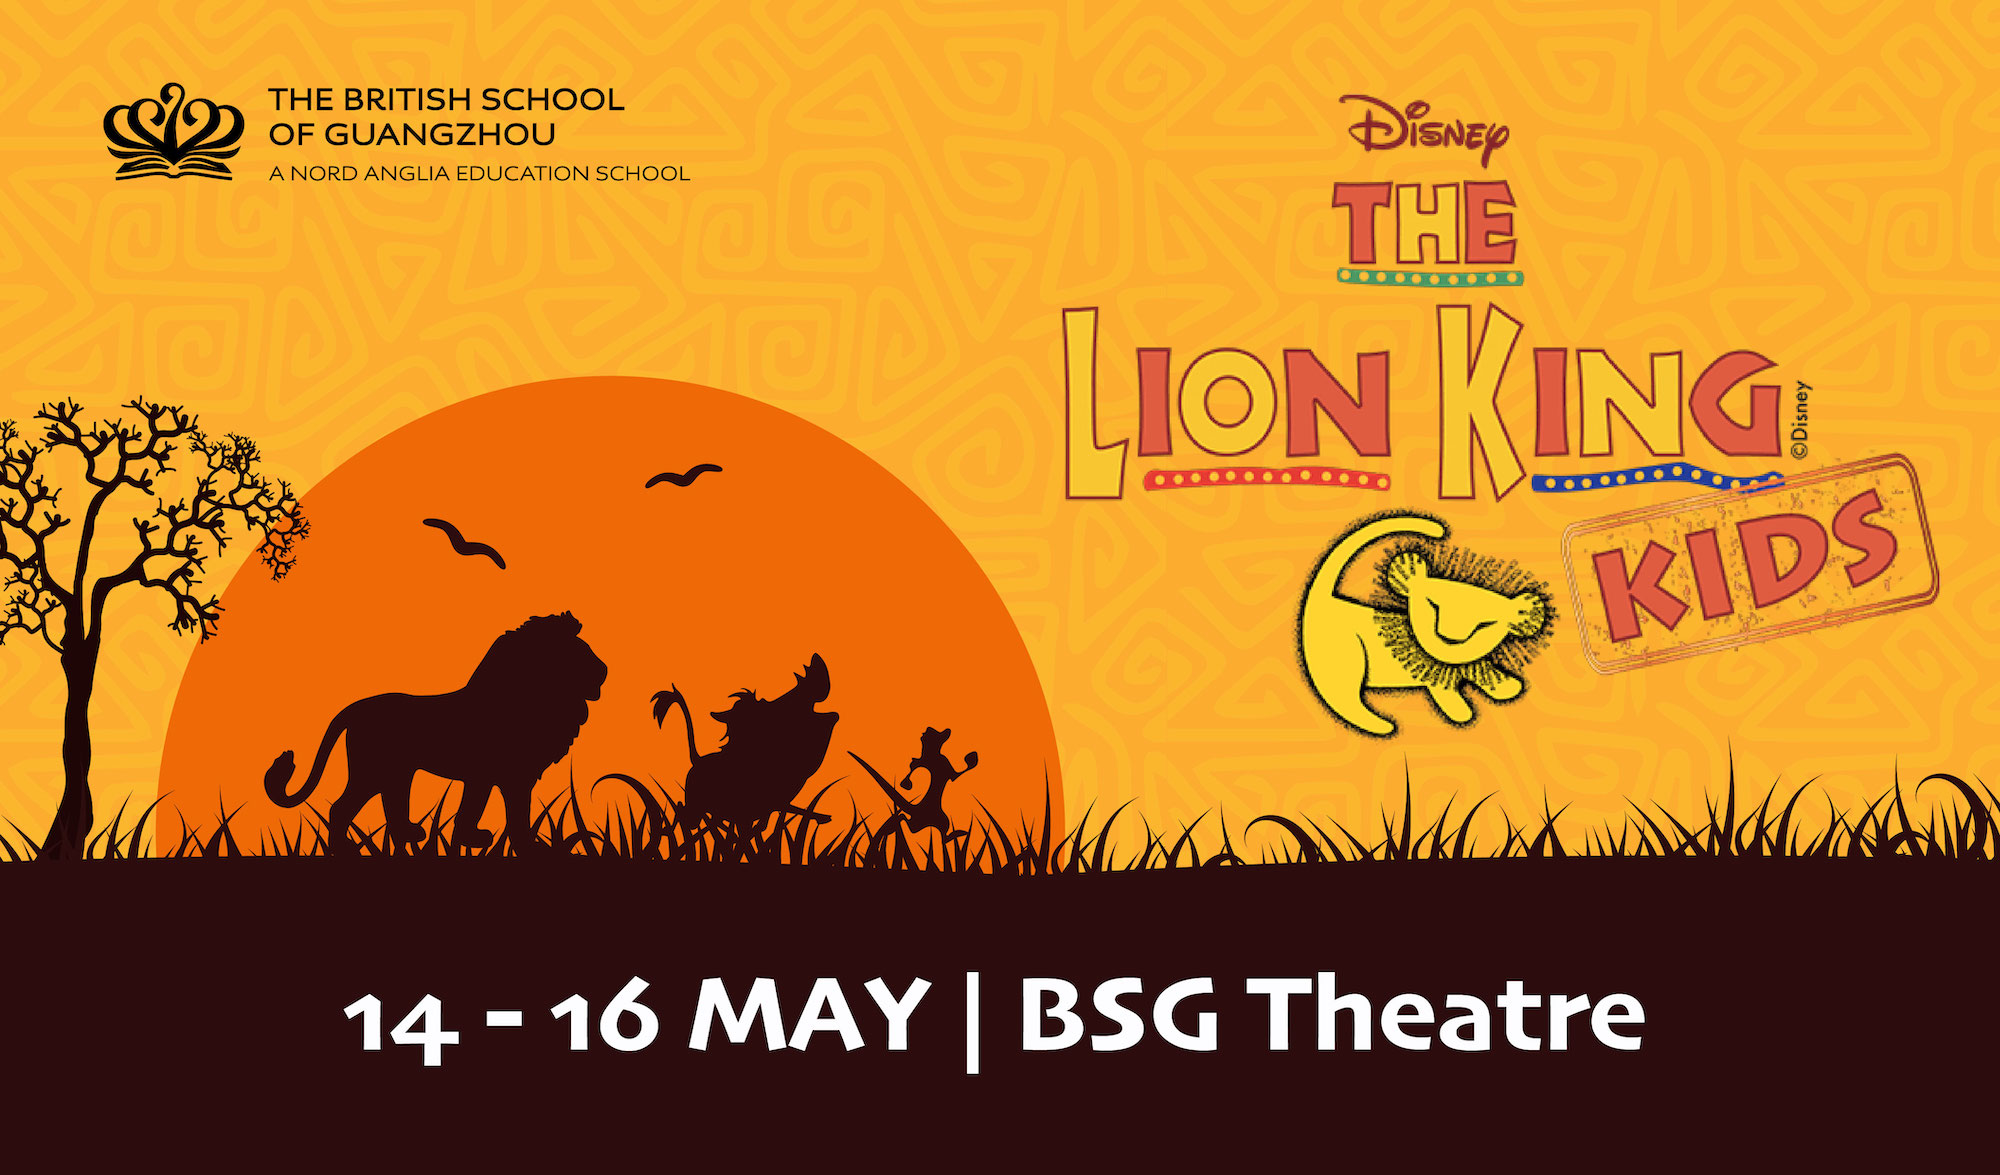 THE LION KING KIDS ‘RULES’ - The Lion King